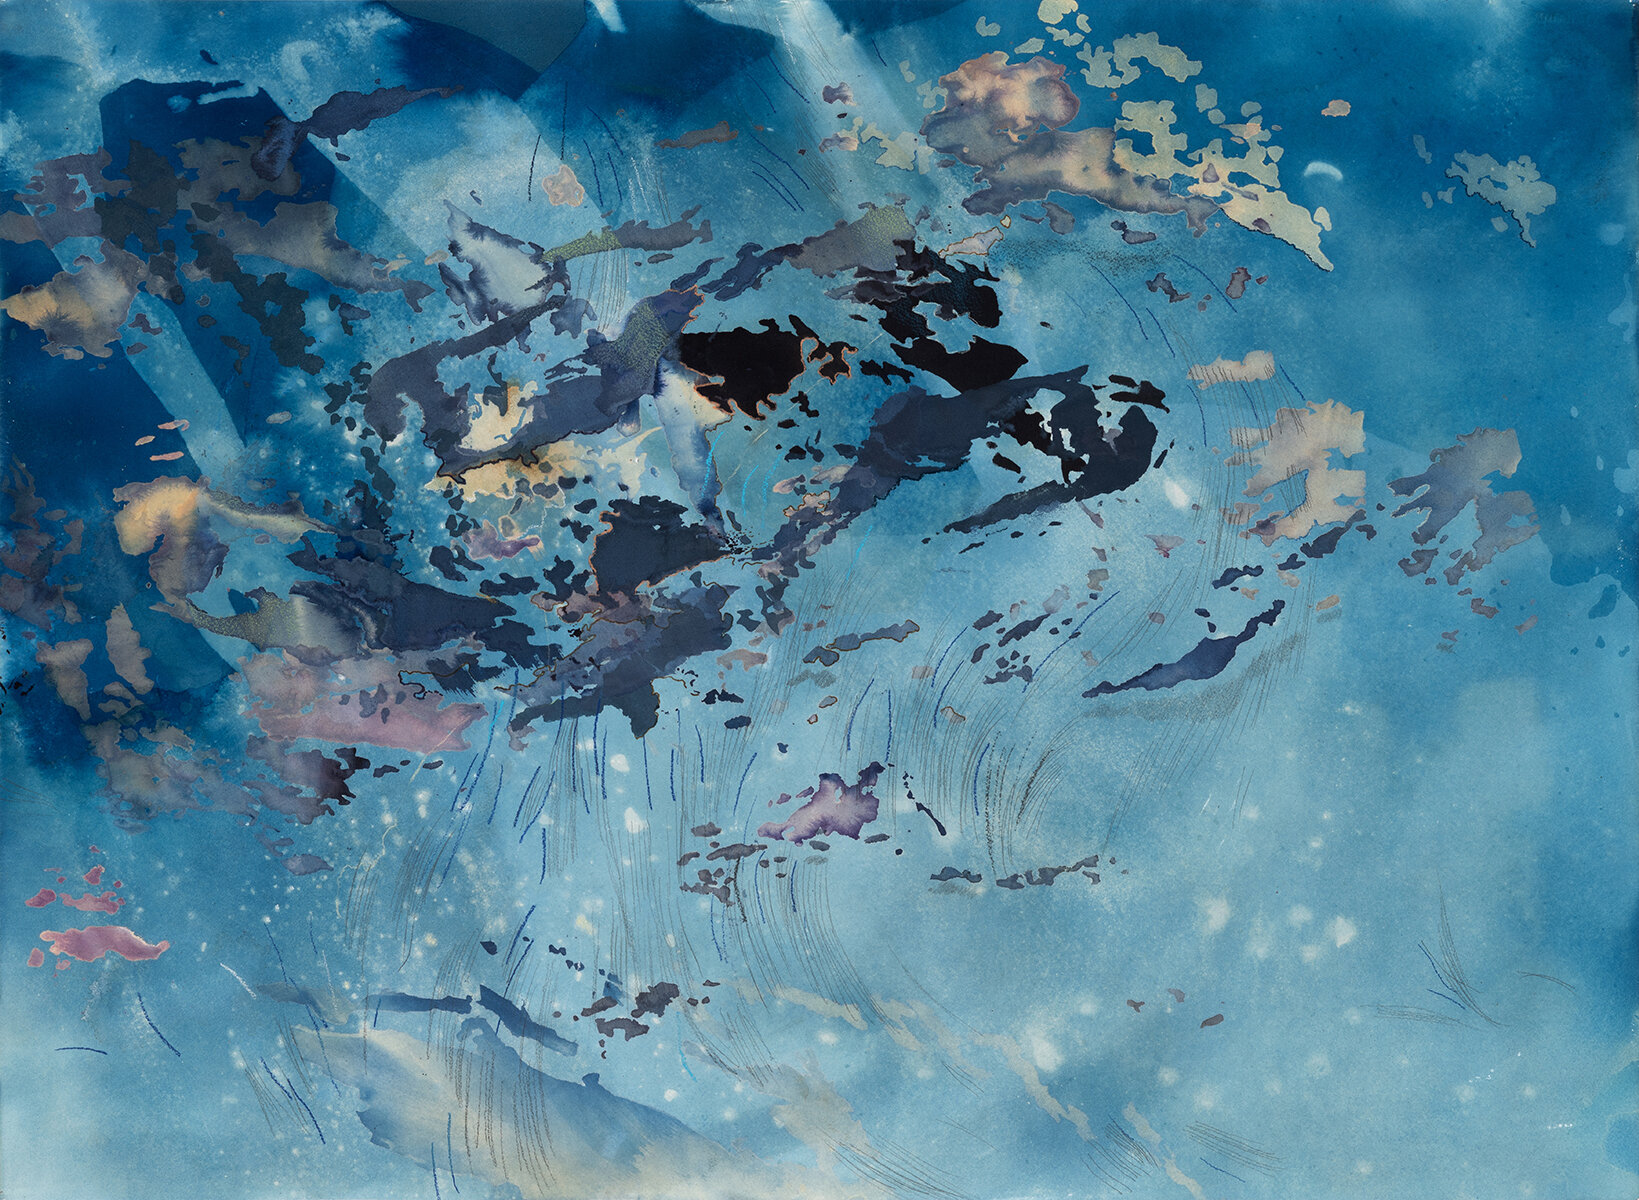  Become Ocean 1   2020, 22 x 30”, cyanotype, sodium bicarbonate, and mixed media on paper 